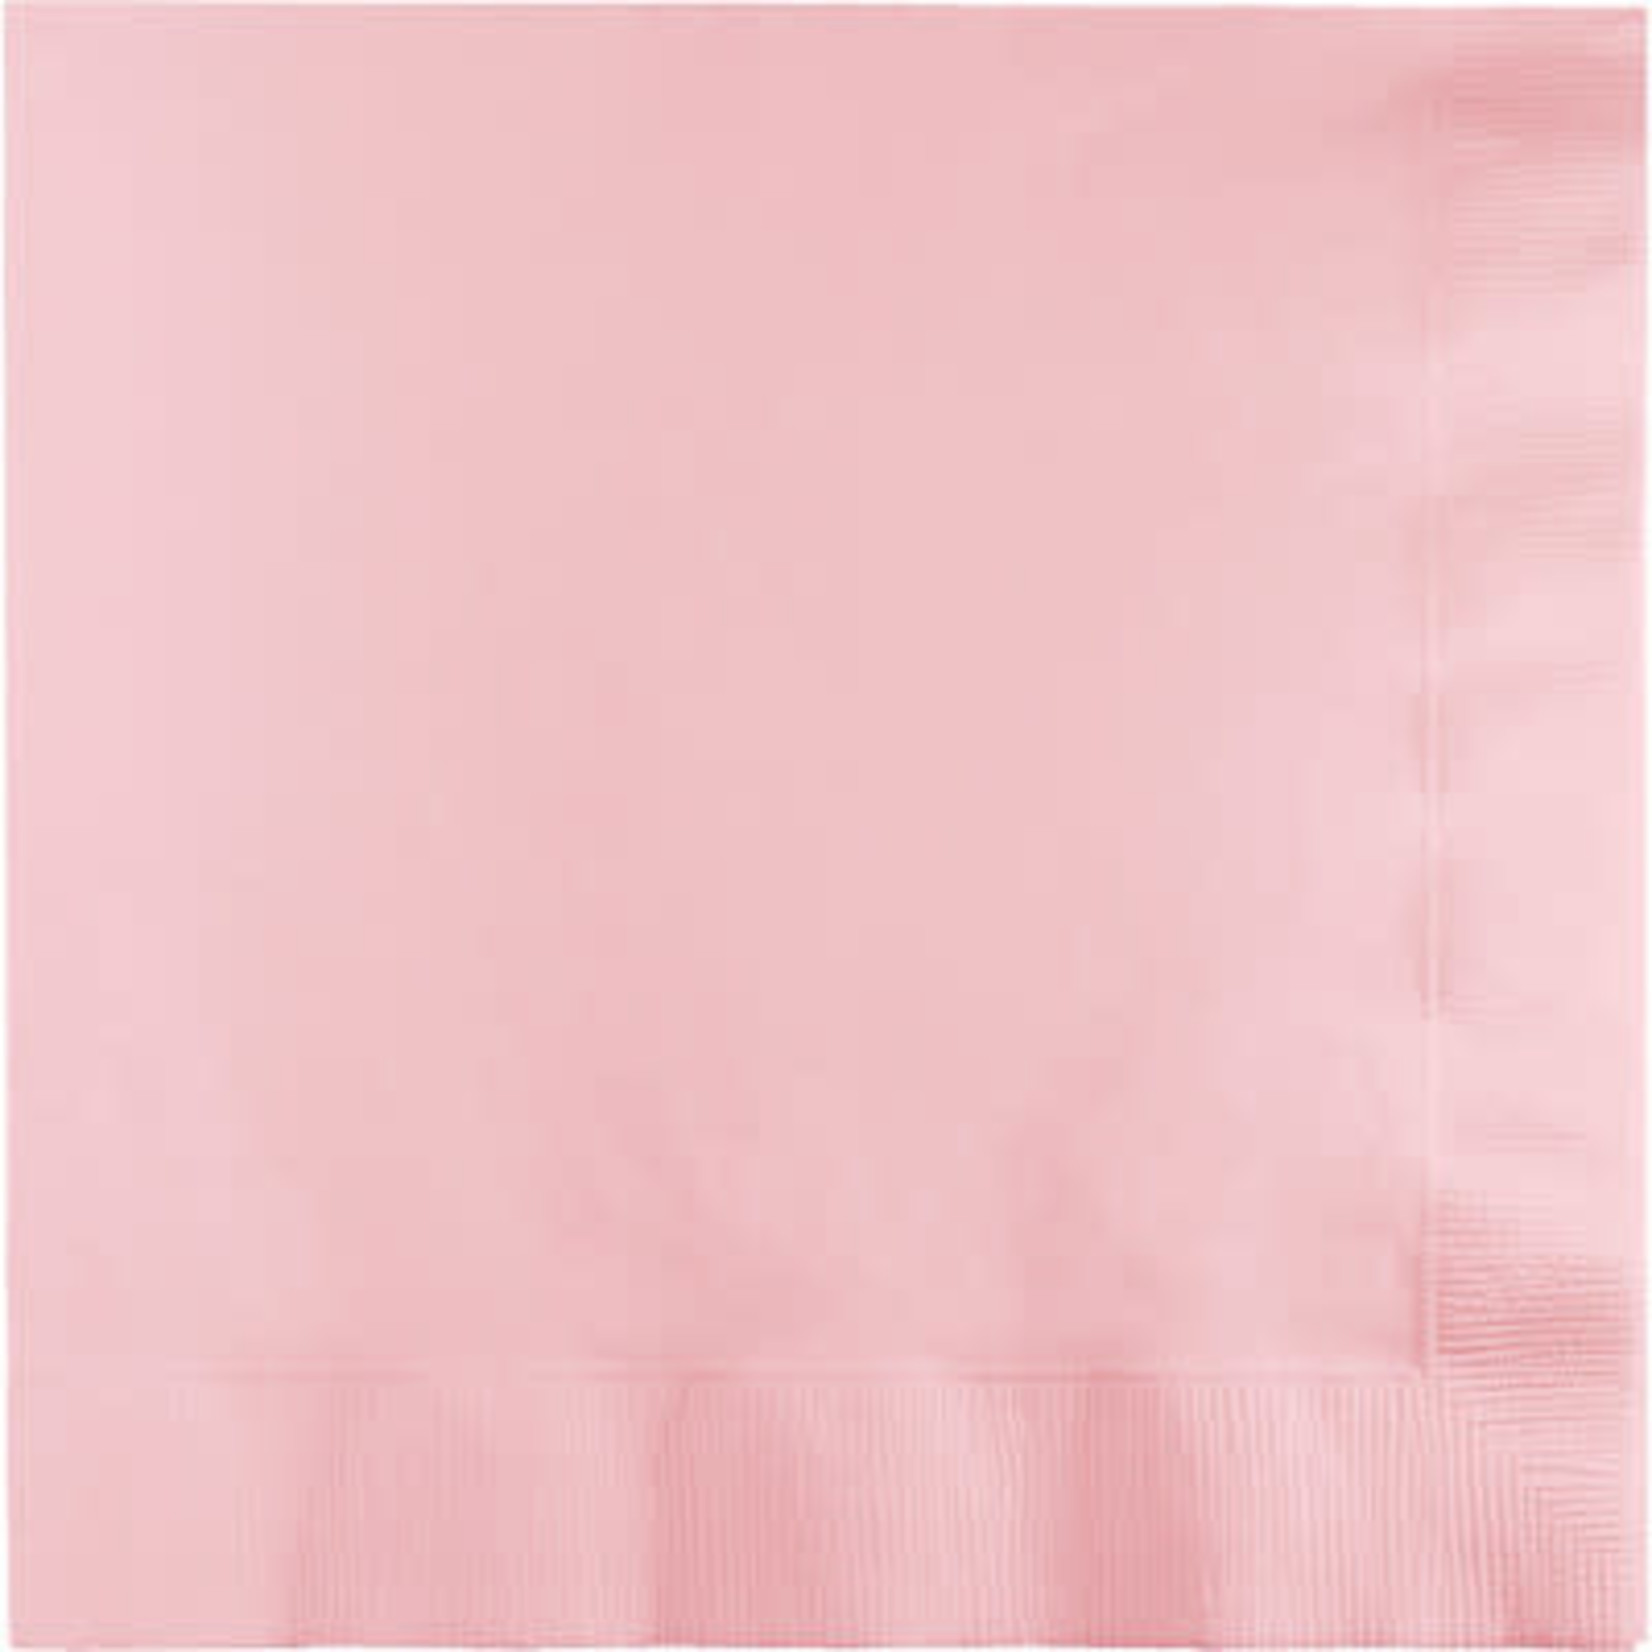 Touch of Color Classic Pink 3-Ply Dinner Napkins - 25ct.